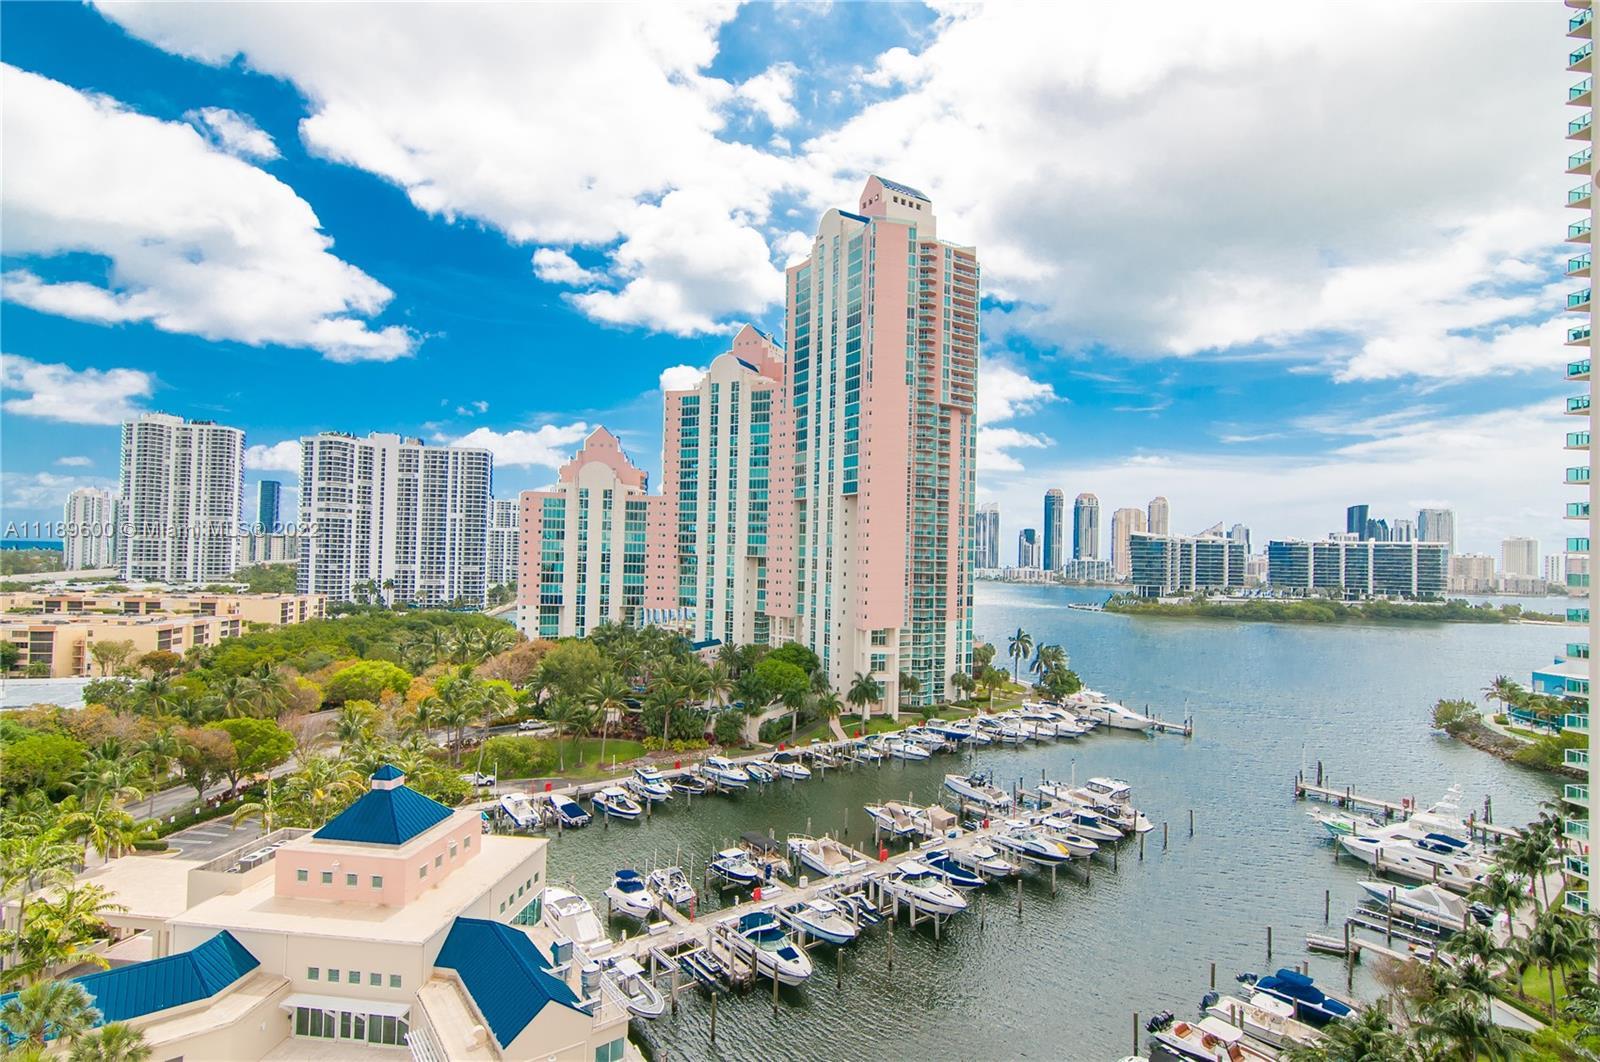 Rarely available Penthouse in Aventura Marina condominium . Home offers calming views of bay and mar